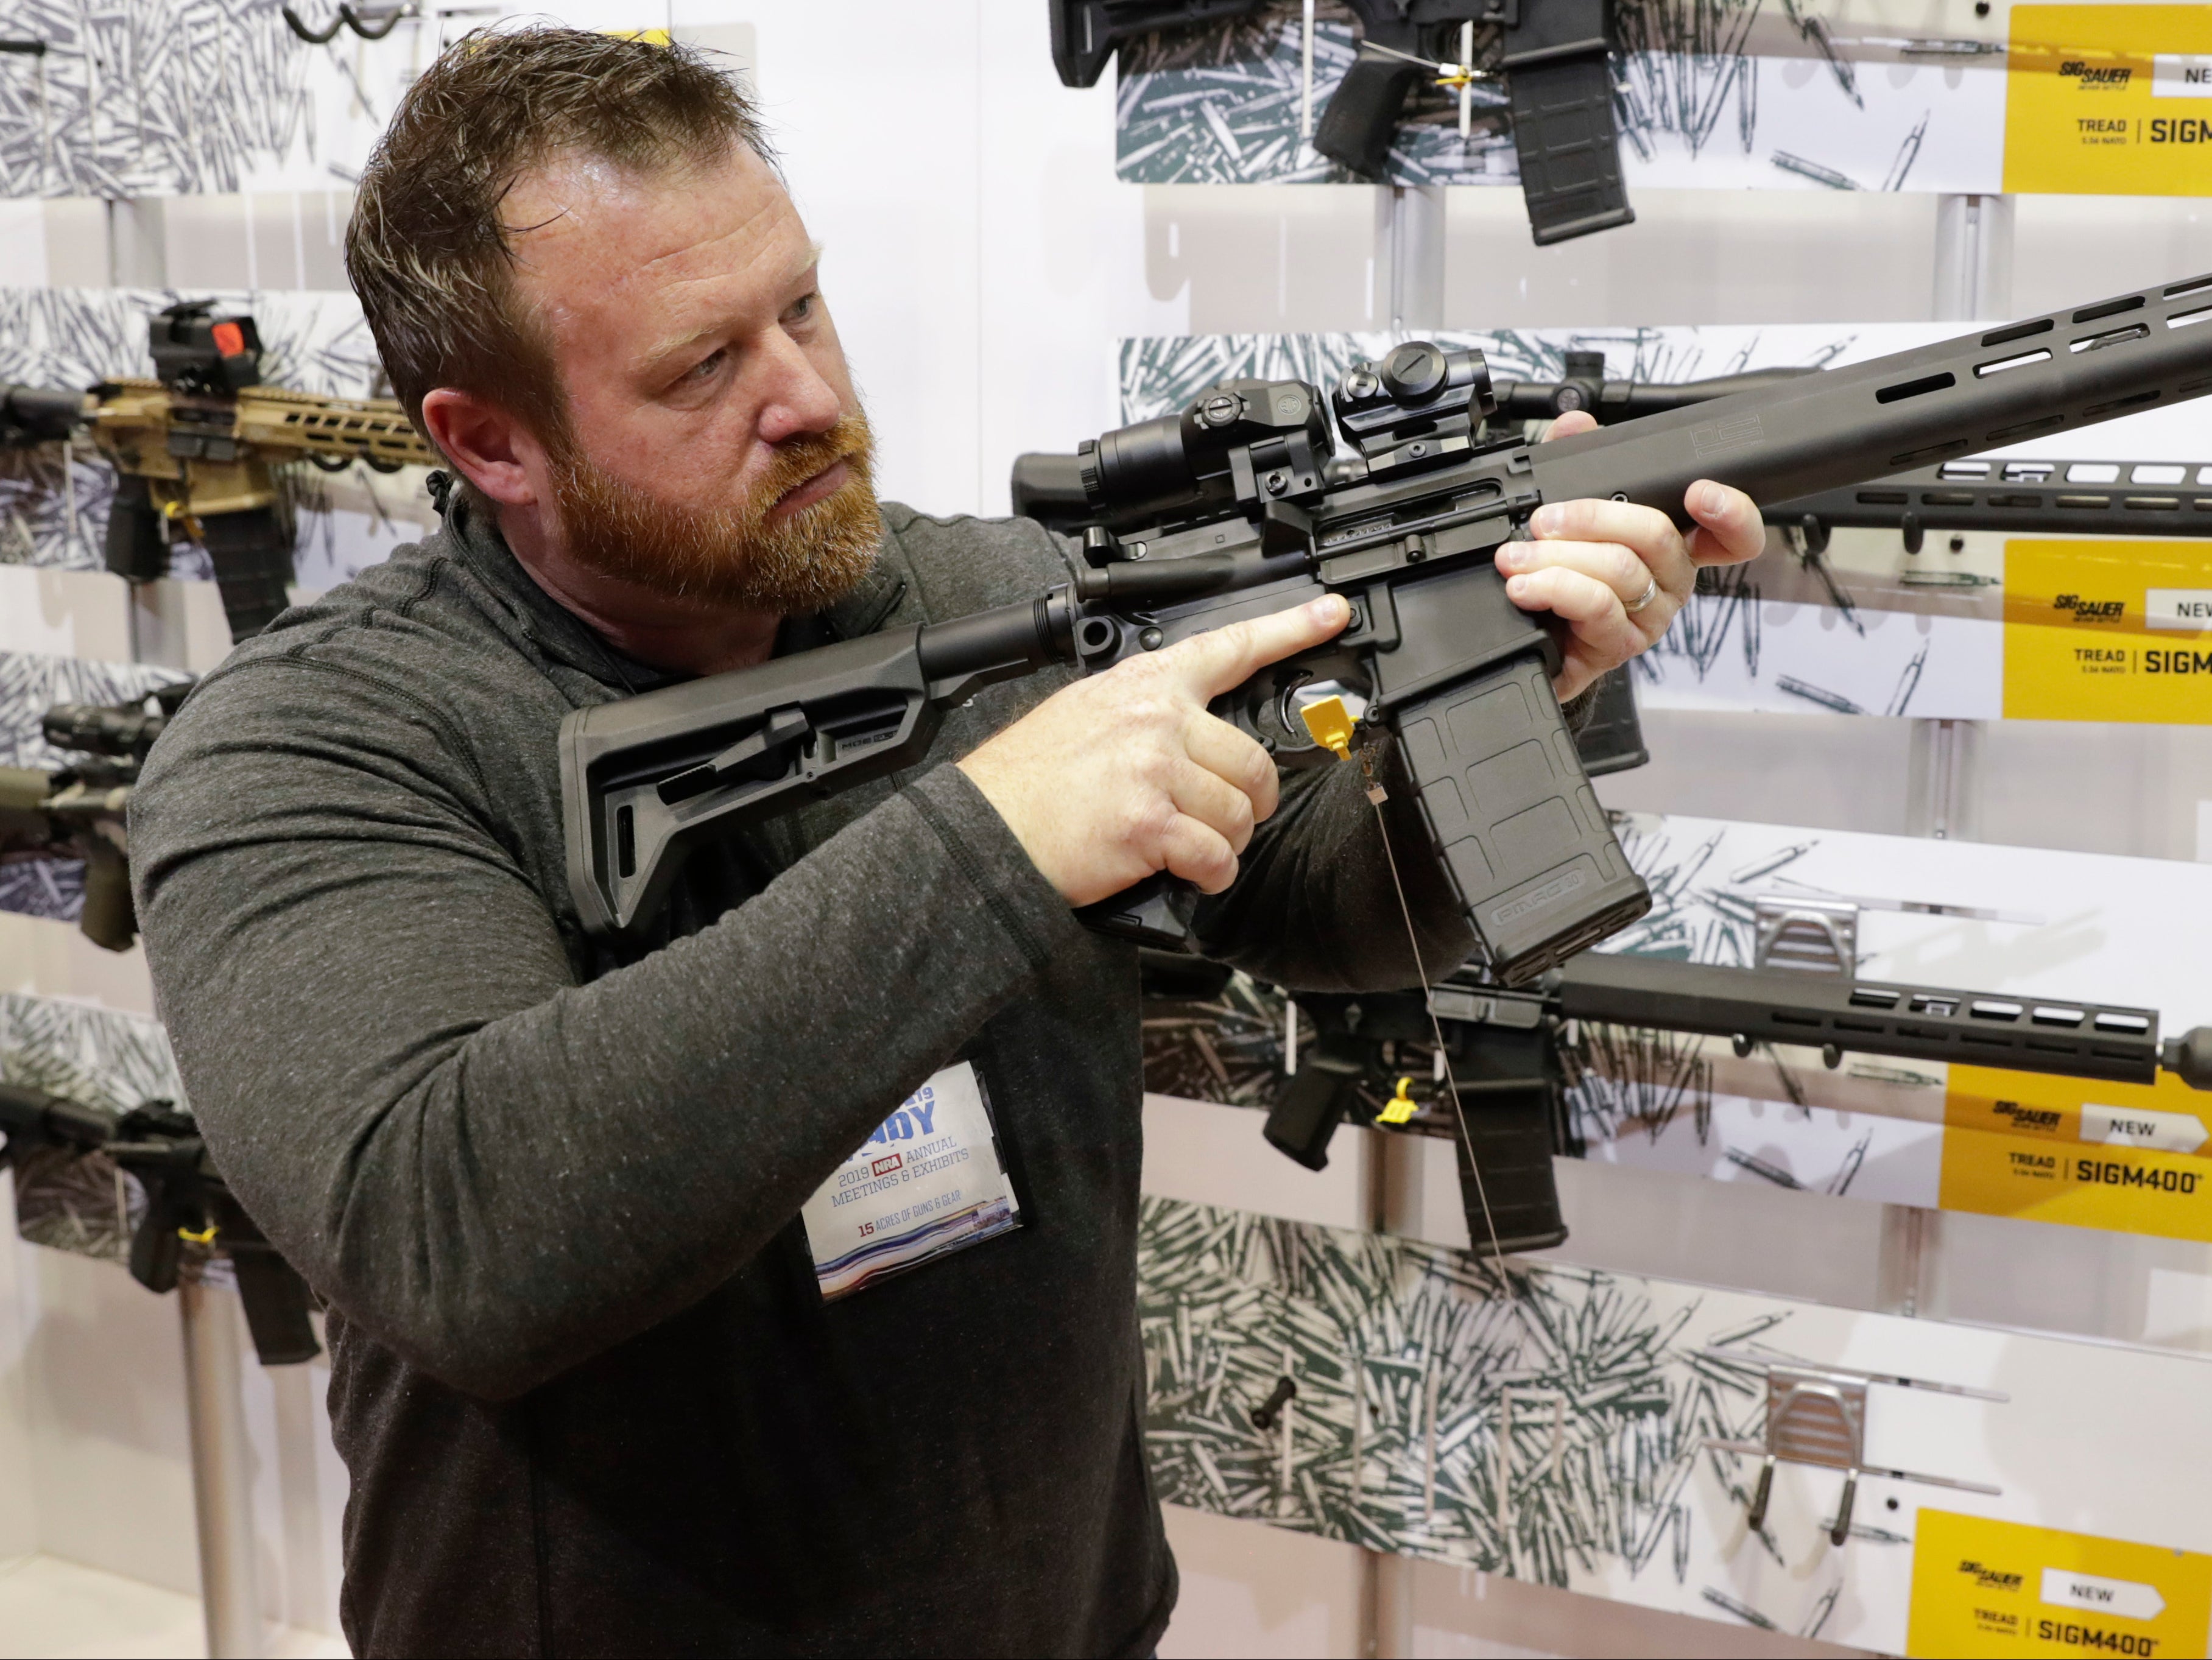 Bryan Oberc, Munster, Ind, tries out an AR-15 from Sig Sauer in the exhibition hall at the National Rifle Association Annual Meeting in Indianapolis